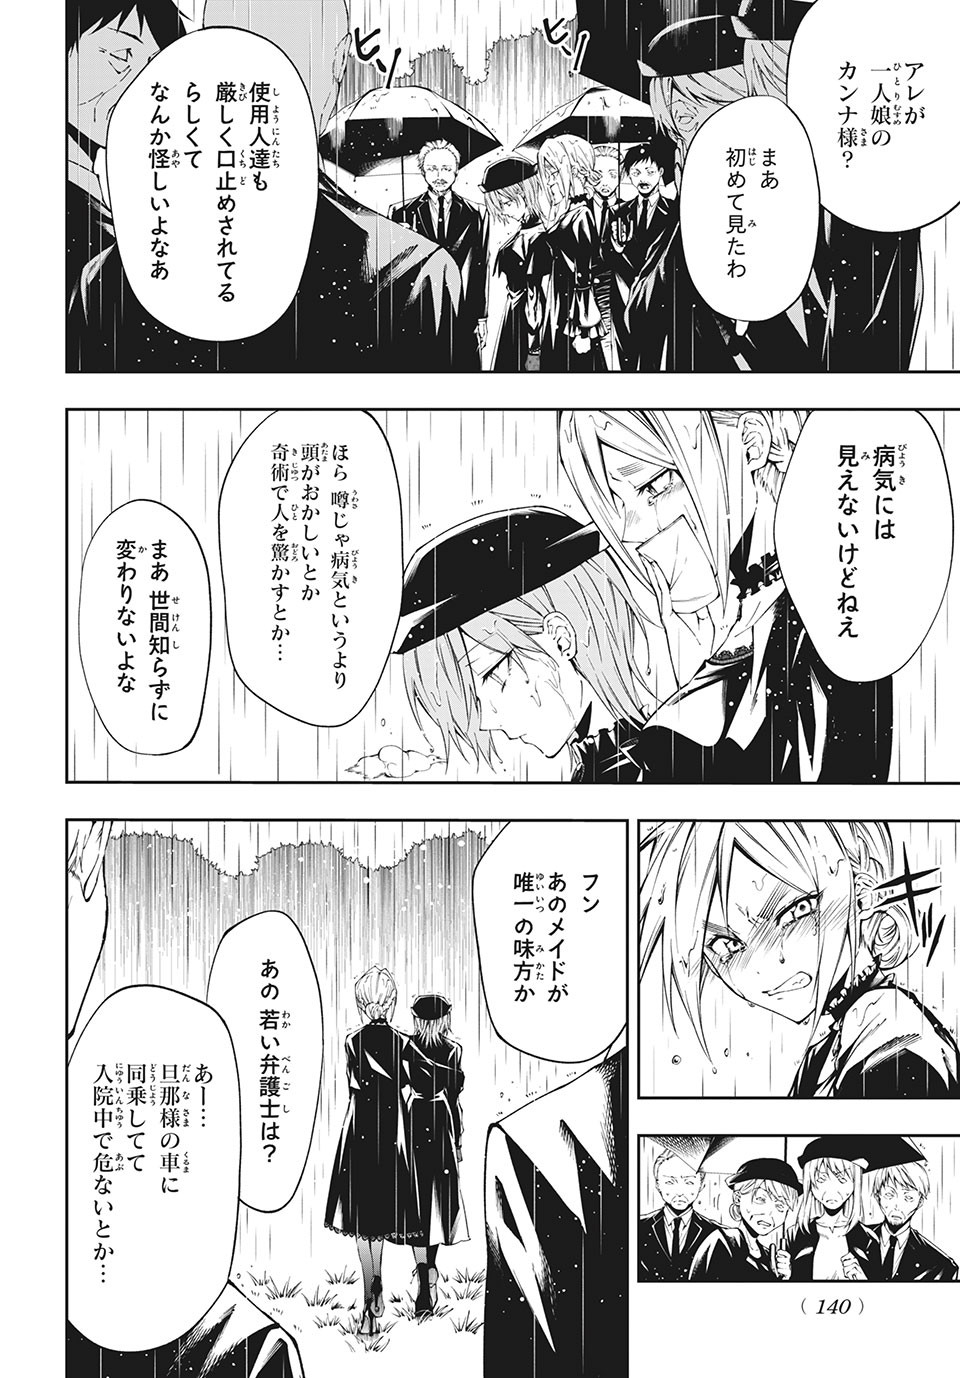 Shaman King: and a garden 第3.3話 - Page 3